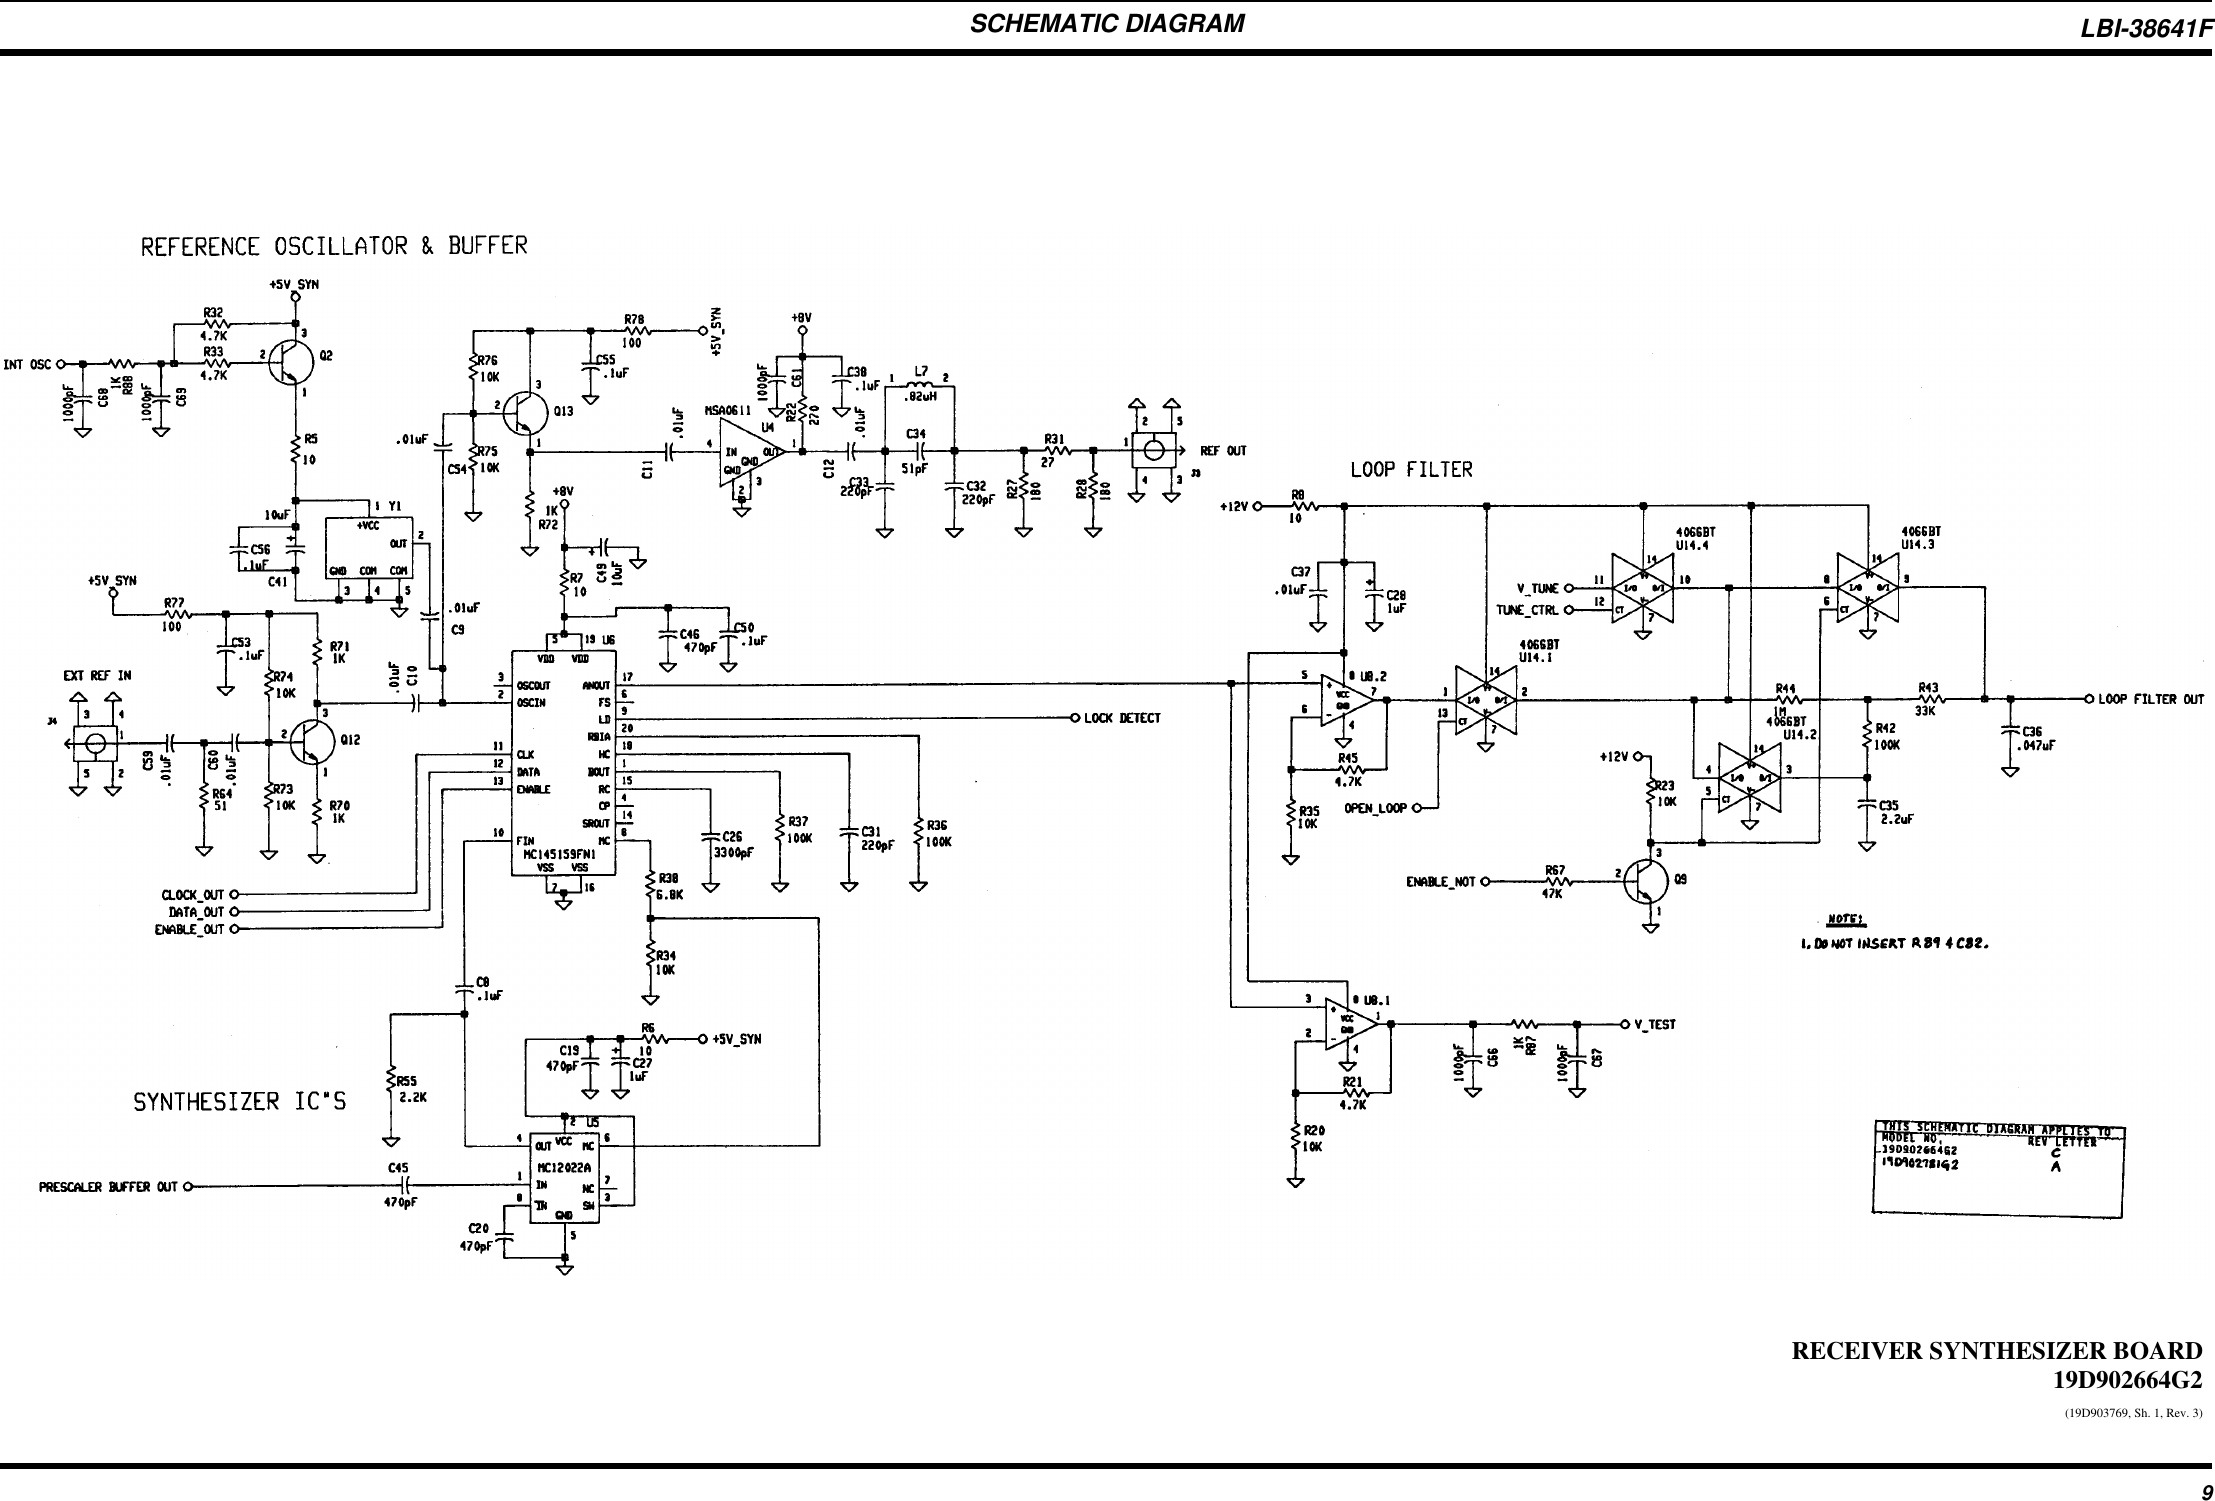 SCHEMATIC DIAGRAMRECEIVER SYNTHESIZER BOARD19D902664G2(19D903769, Sh. 1, Rev. 3)LBI-38641F9